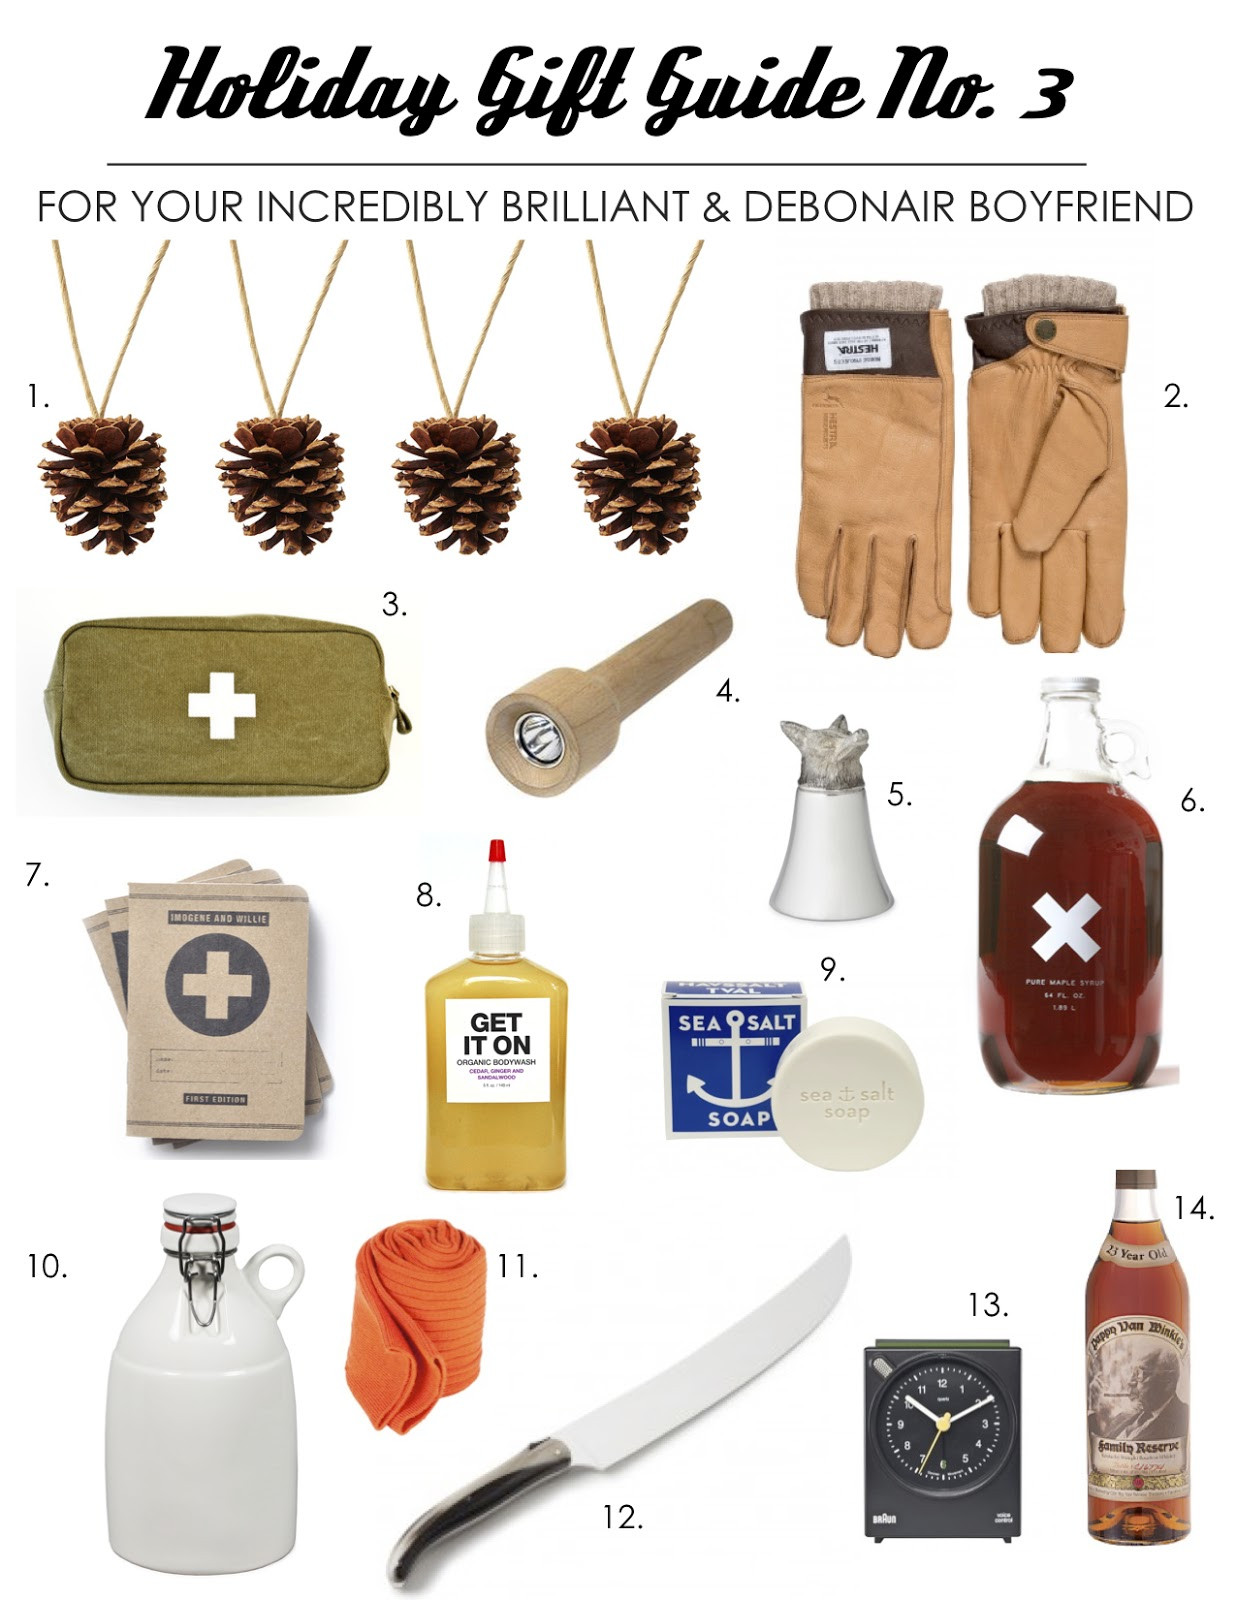 Good Gift Ideas For Your Boyfriend
 Gift Guide 2012 The Best Gifts for Your Boyfriend Hey